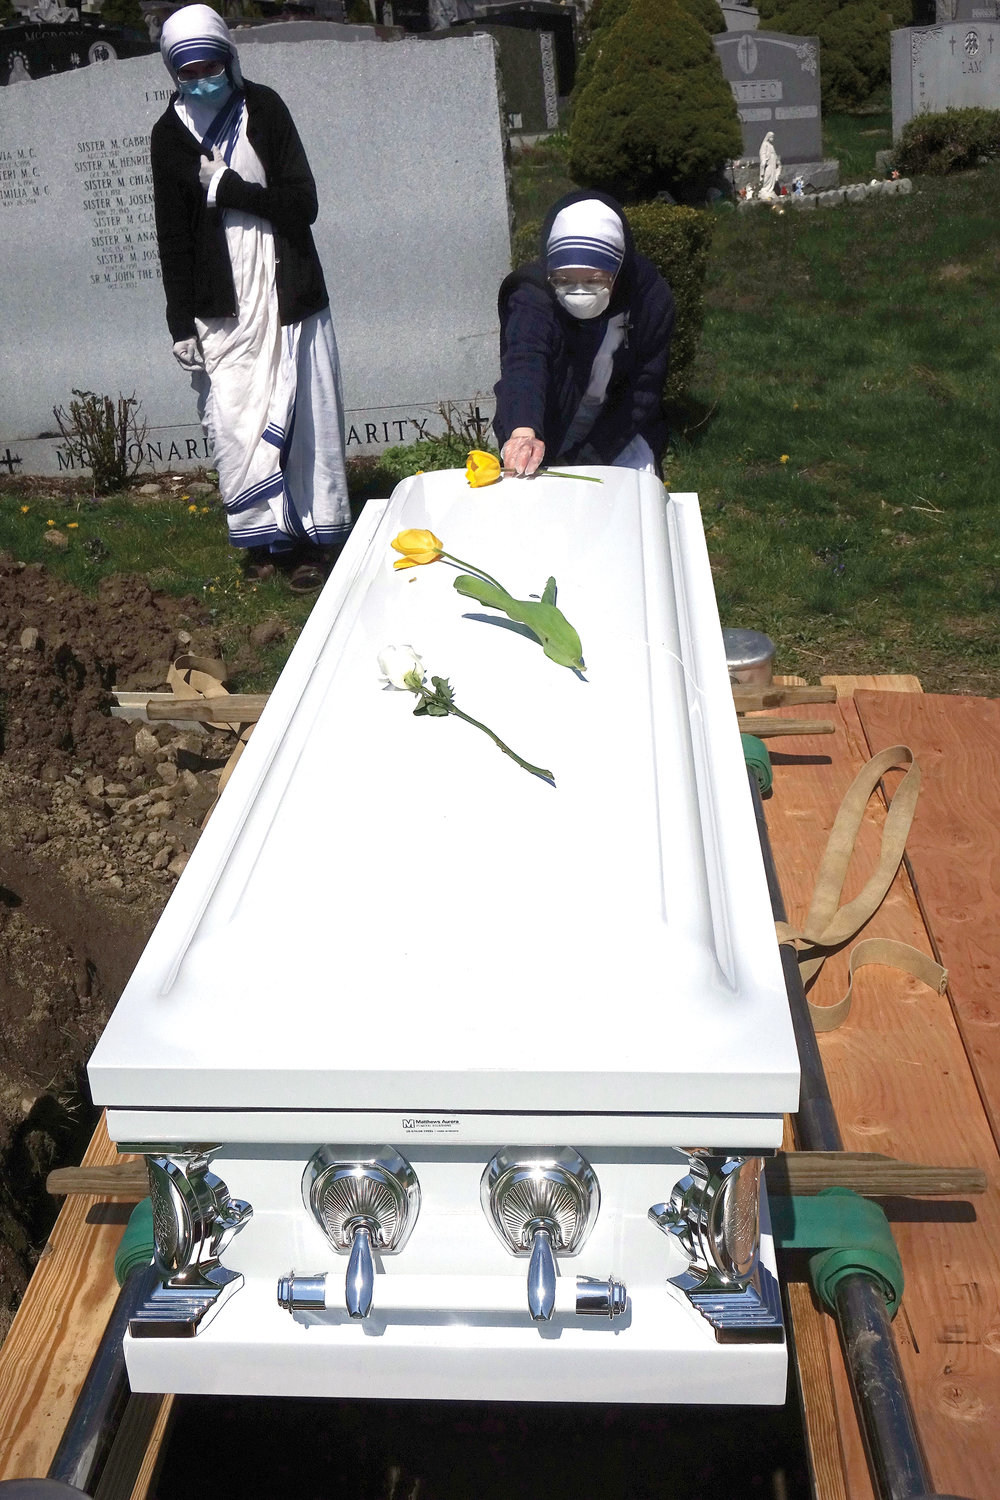 A Missionaries of Charity sister tenderly places a a flower on the casket of one of two deceased nuns, Sister Francesca. M.C., and Sister Gertrude, M.C., who were buried at Gate of Heaven Cemetery in Hawthorne April 25.